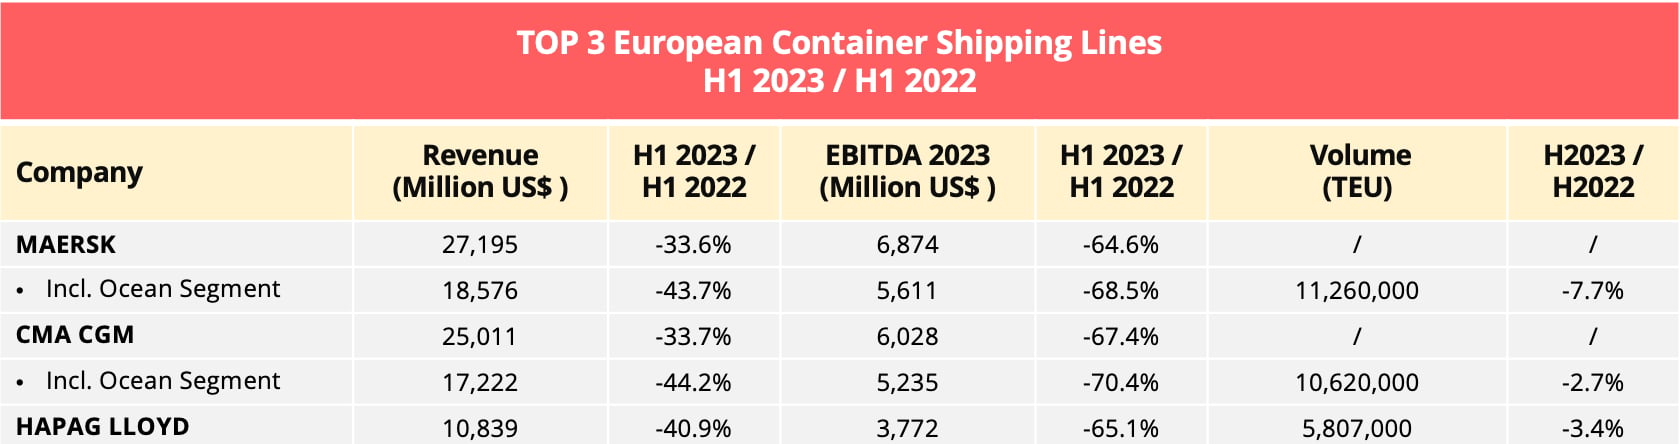 top3_european-shipping_lines_s1_2023